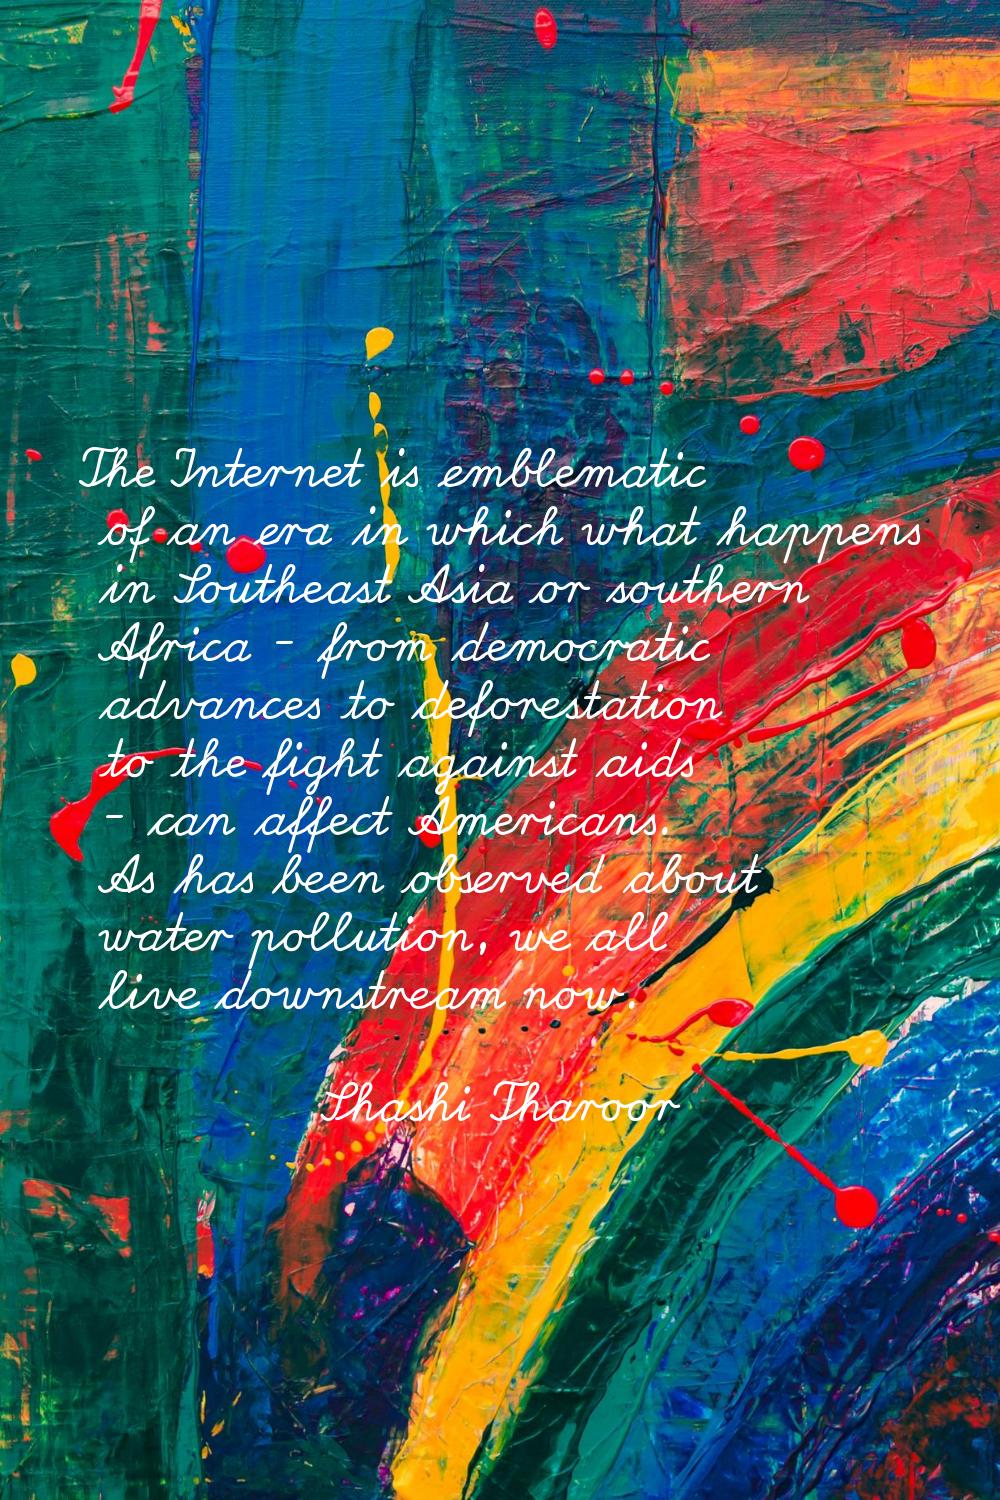 The Internet is emblematic of an era in which what happens in Southeast Asia or southern Africa - f